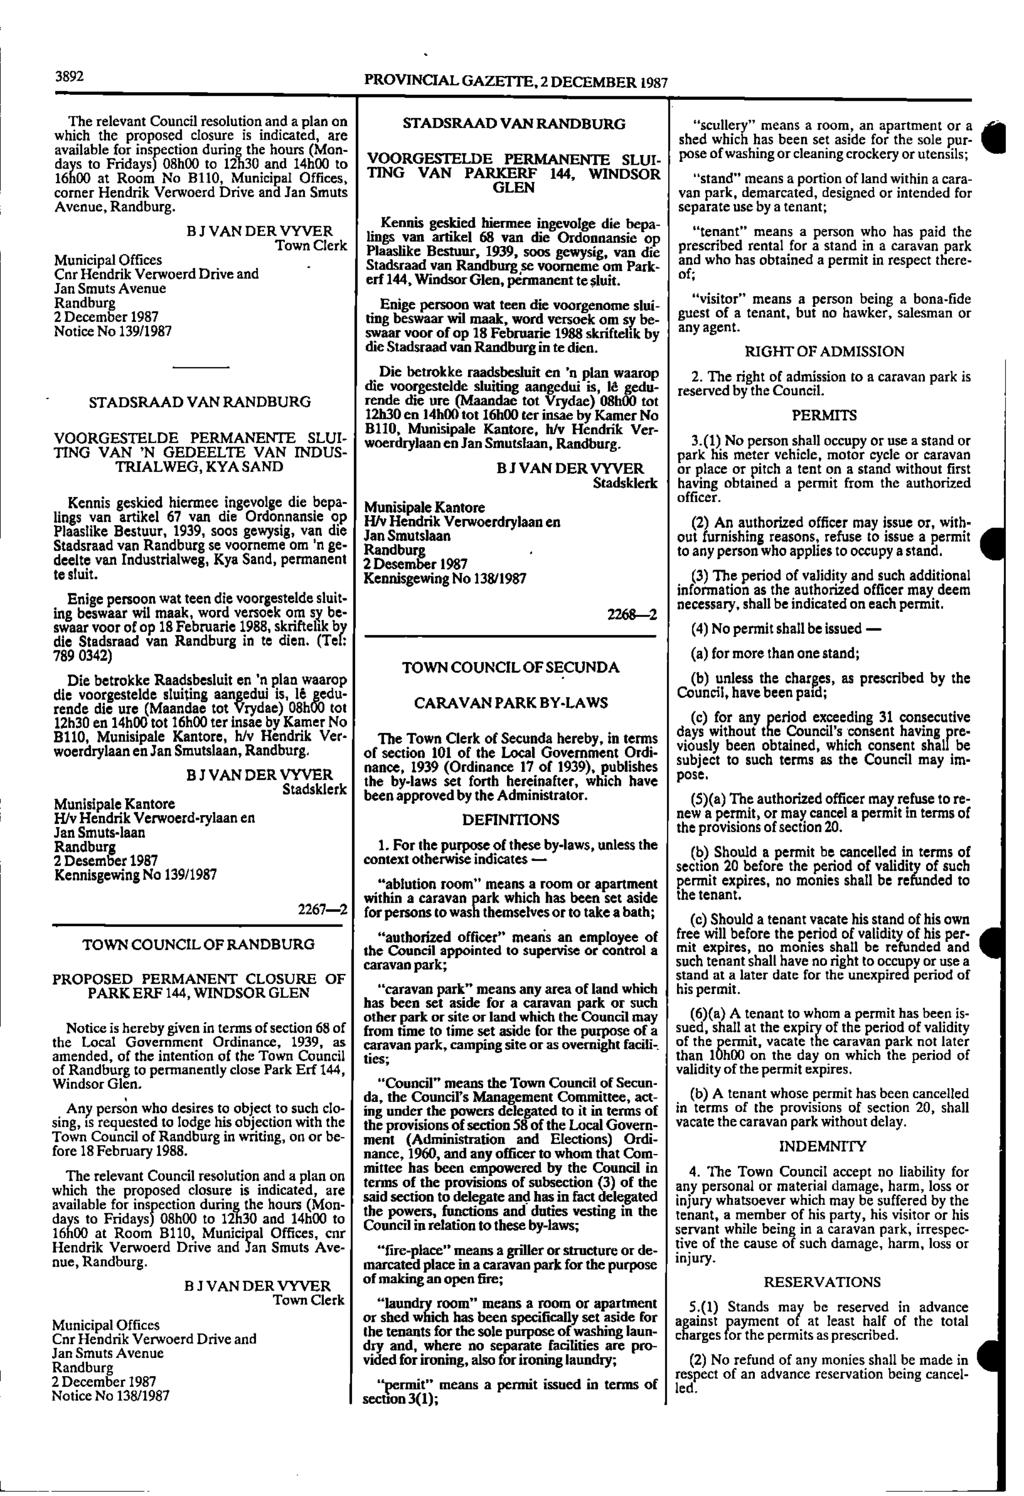 1 3892 PROVINCIAL GAZETTE, 2 DECEMBER 1987 The relevant Council resolution and a plan on STADSRAAD VAN RANDBURG "scullery" means a room, an apartment or a which the proposed closure is indicated, are